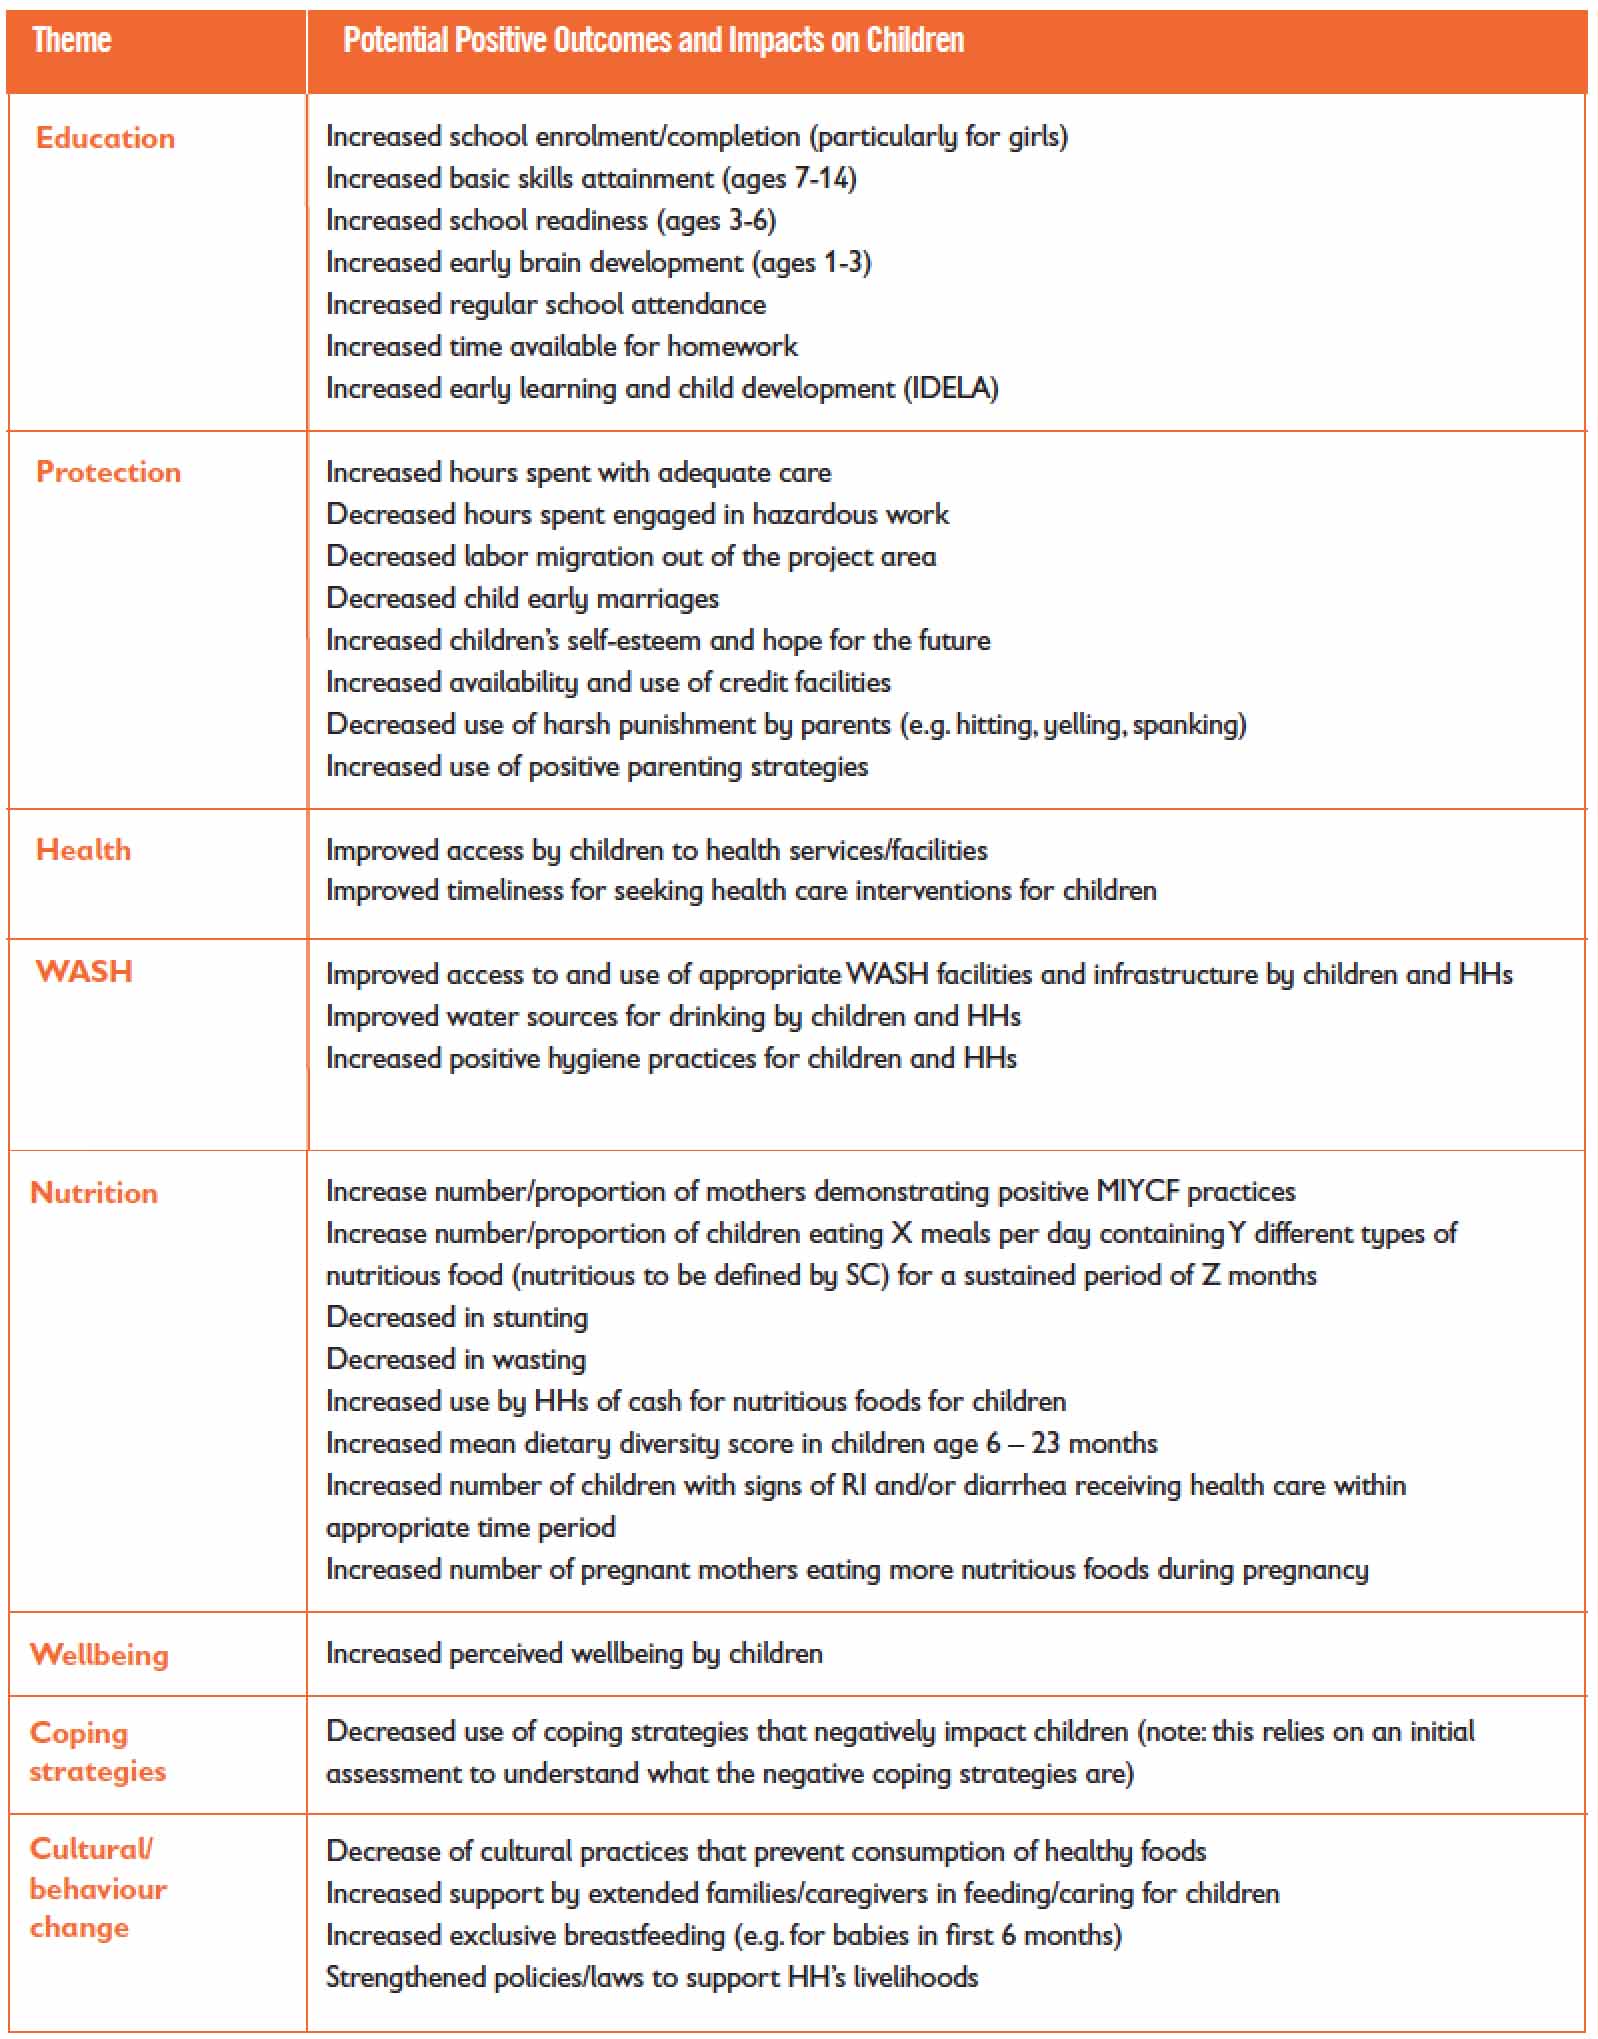 Table 1. Examples of potential impacts of PA projects on children’s survival, learning and protection. Reference sheets for some of these indicators were developed and can be found in Tool 6.1 Menu of Child-sensitive Indicators Manual. For indicators specifically referring to Education, Health and Protection outcomes, project teams should consult the relevant Global Theme MEAL Advisors.